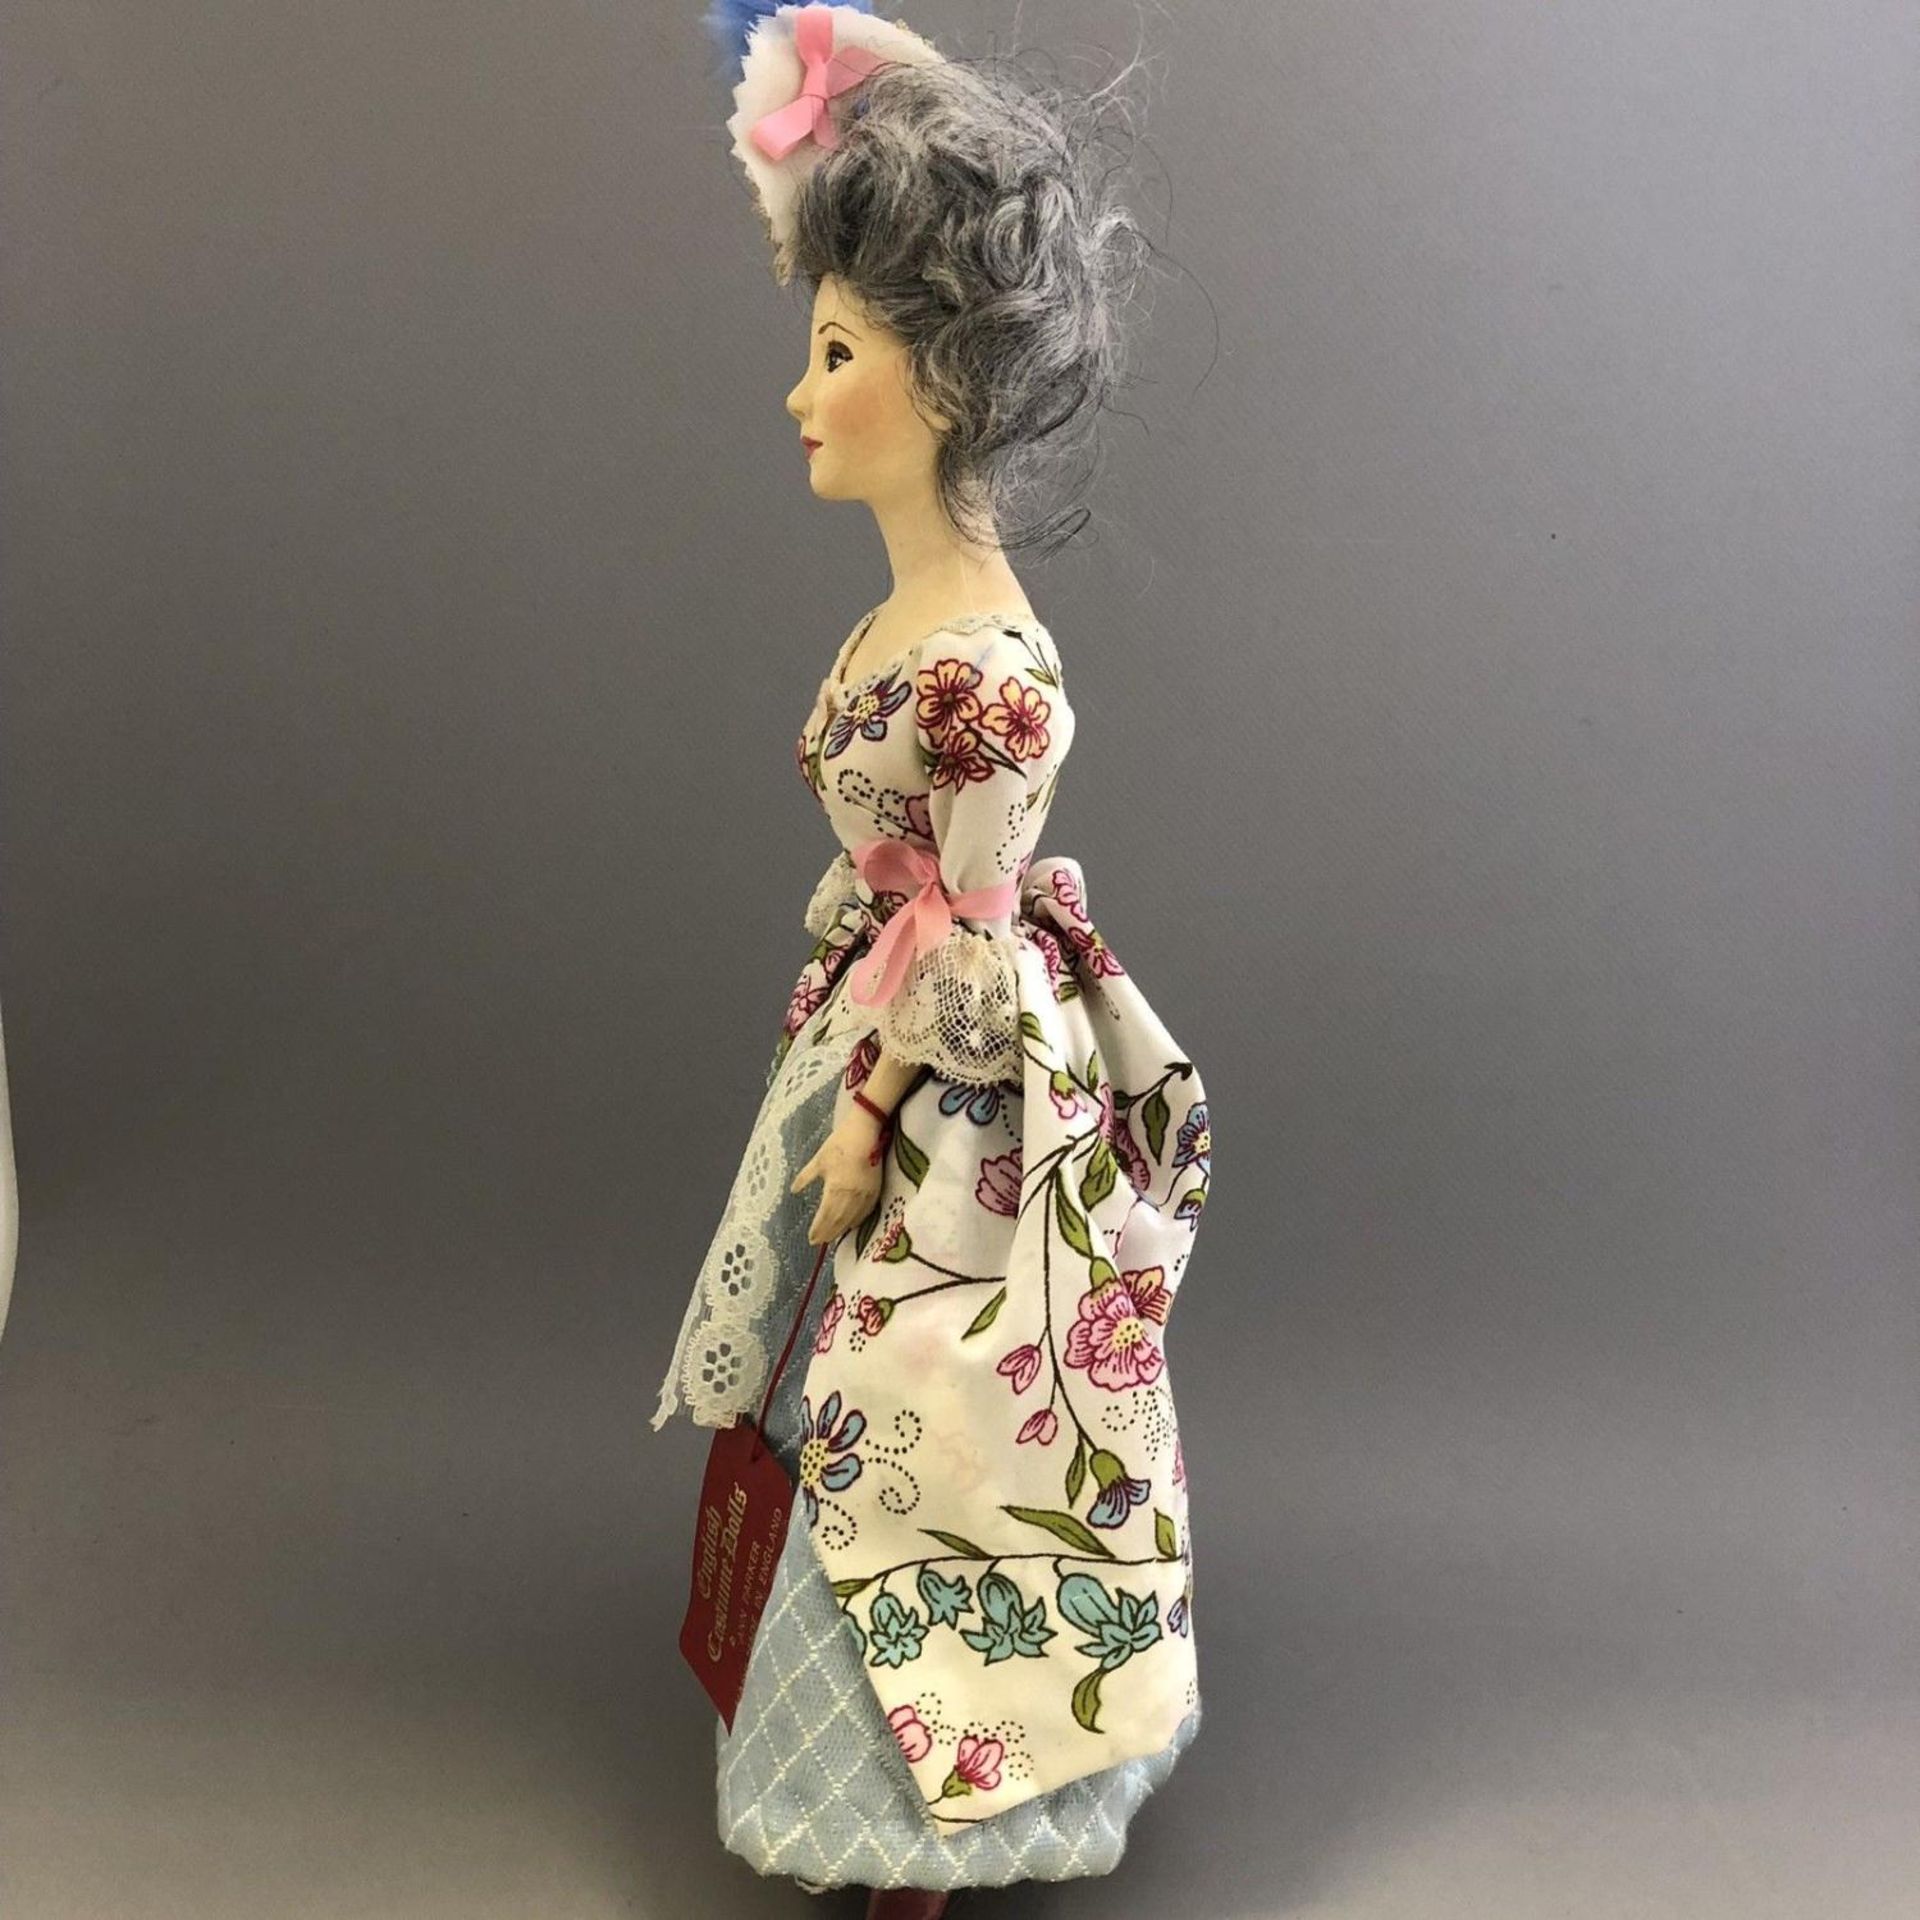 Collectable Vintage Ann Parker Doll Handmade English Costume Doll Georgian Lady 1775 - Image 3 of 10